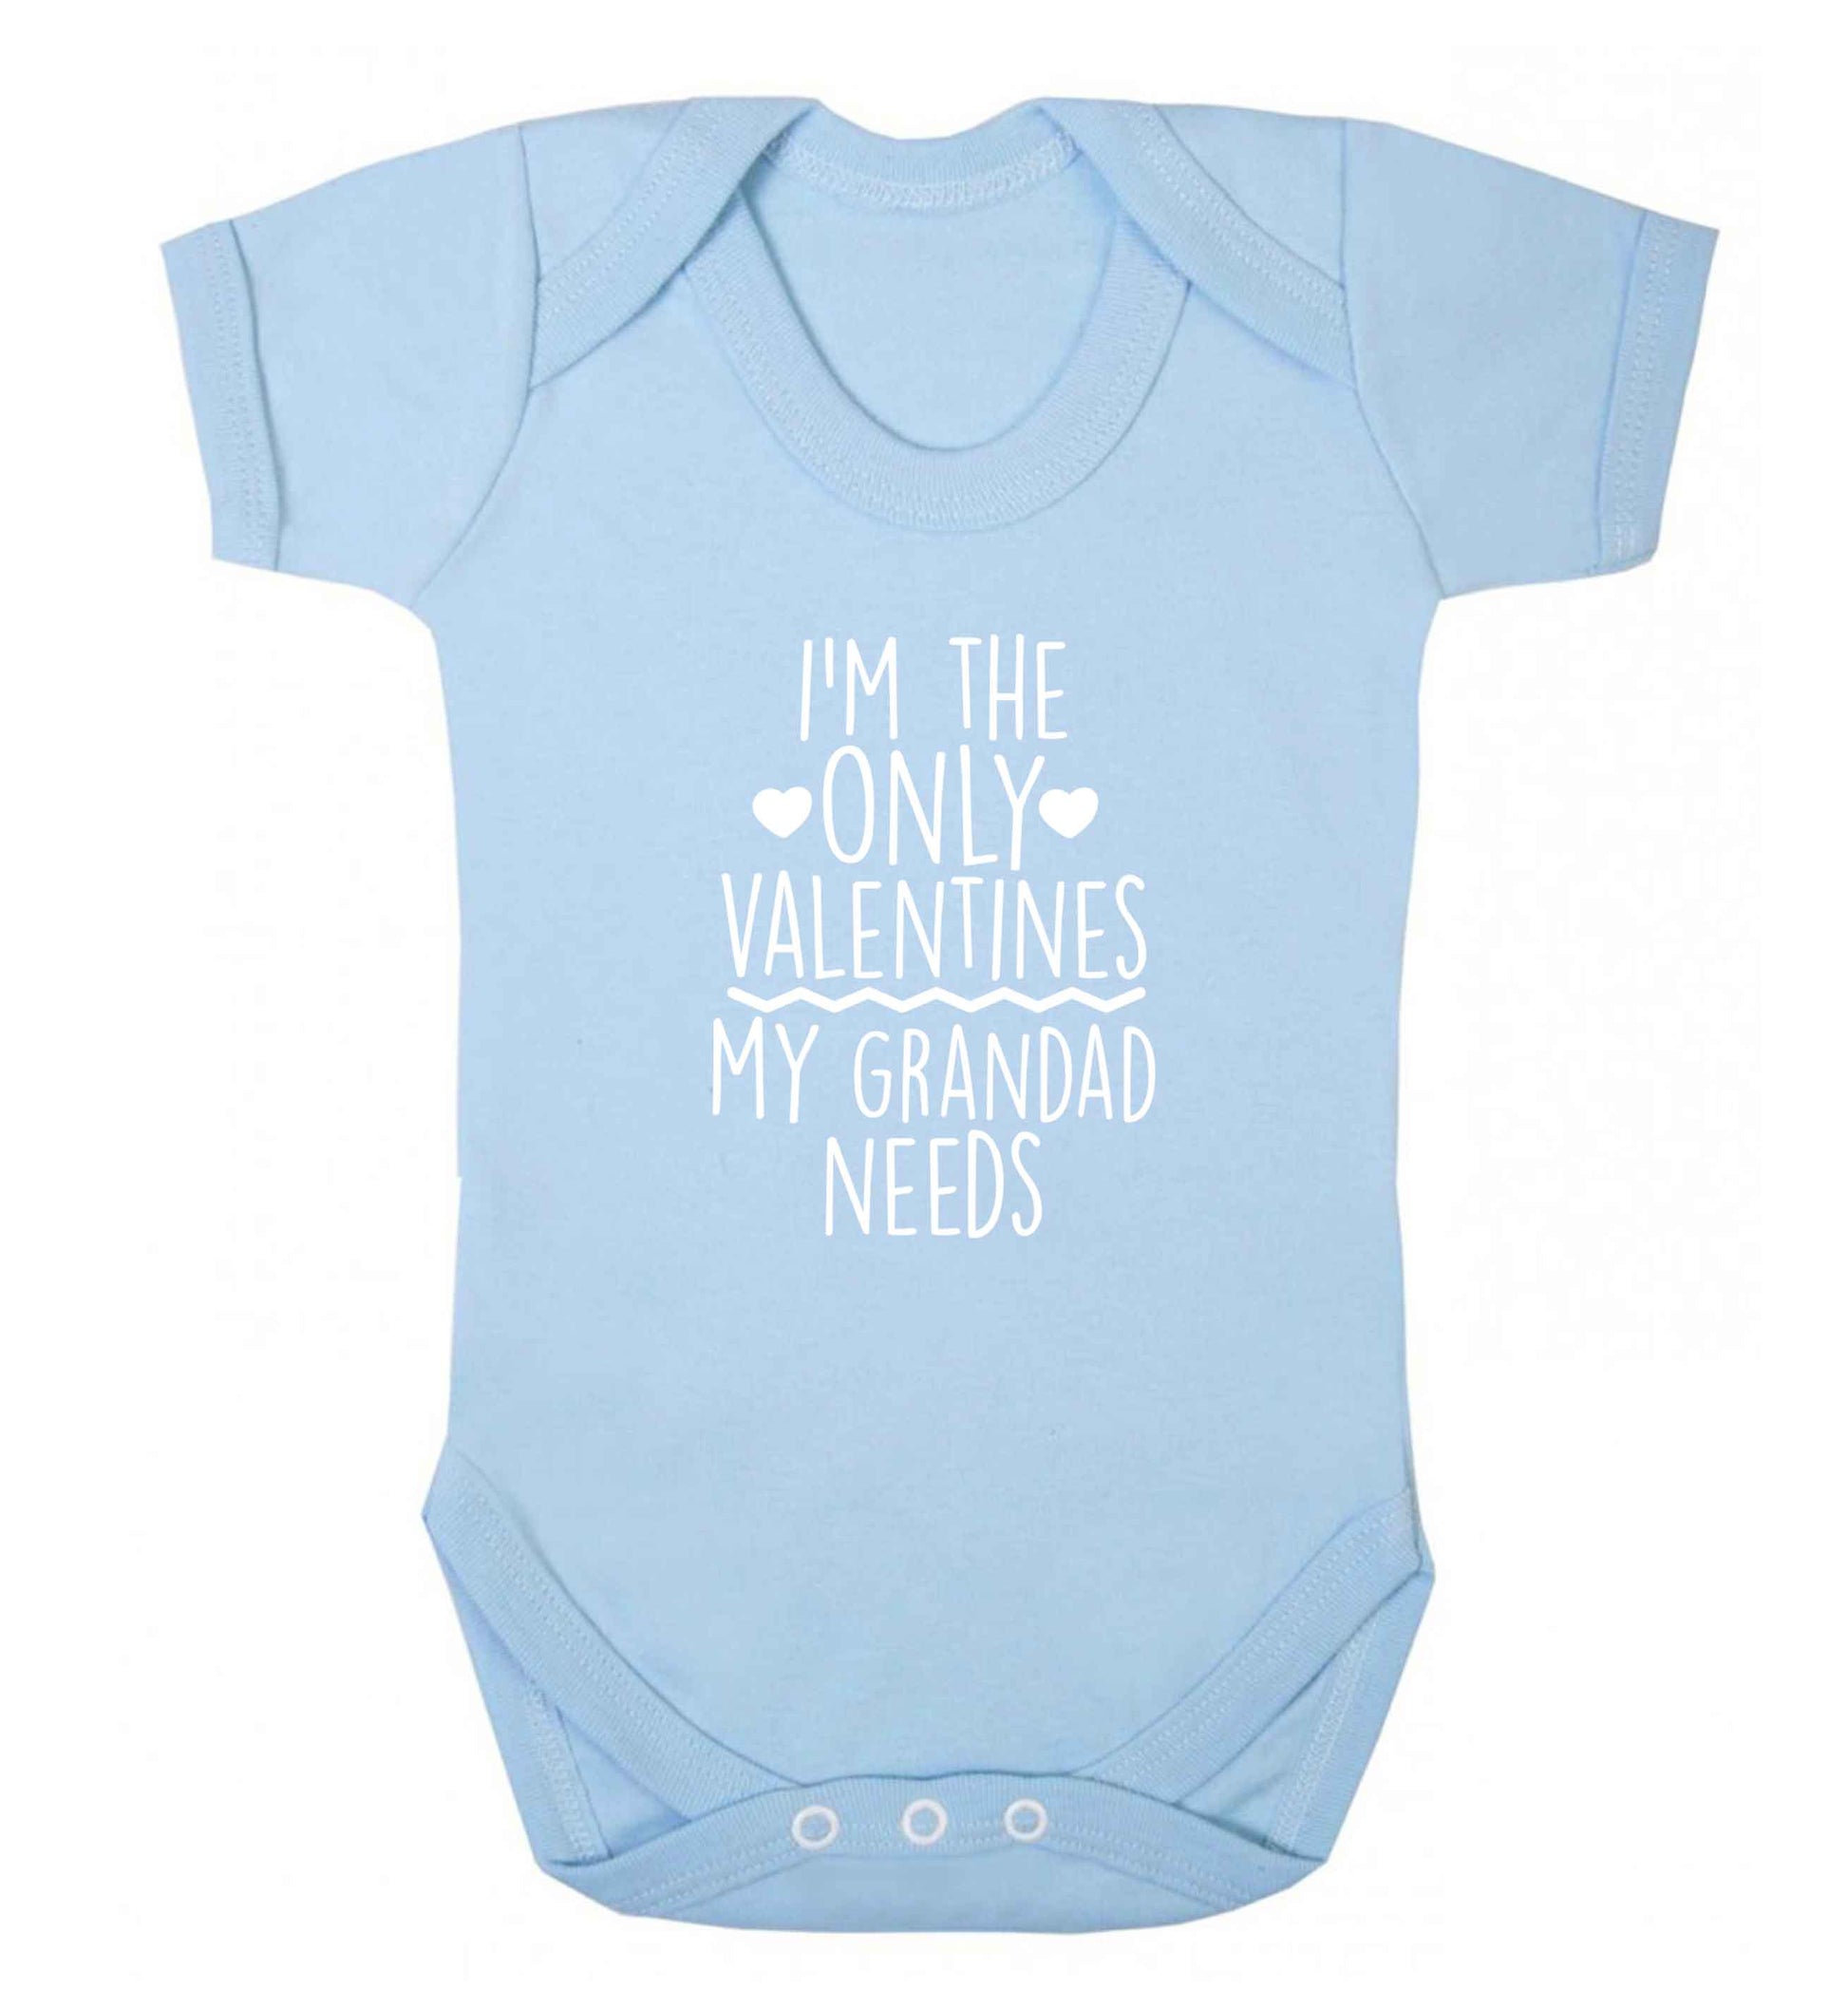 I'm the only valentines my grandad needs baby vest pale blue 18-24 months